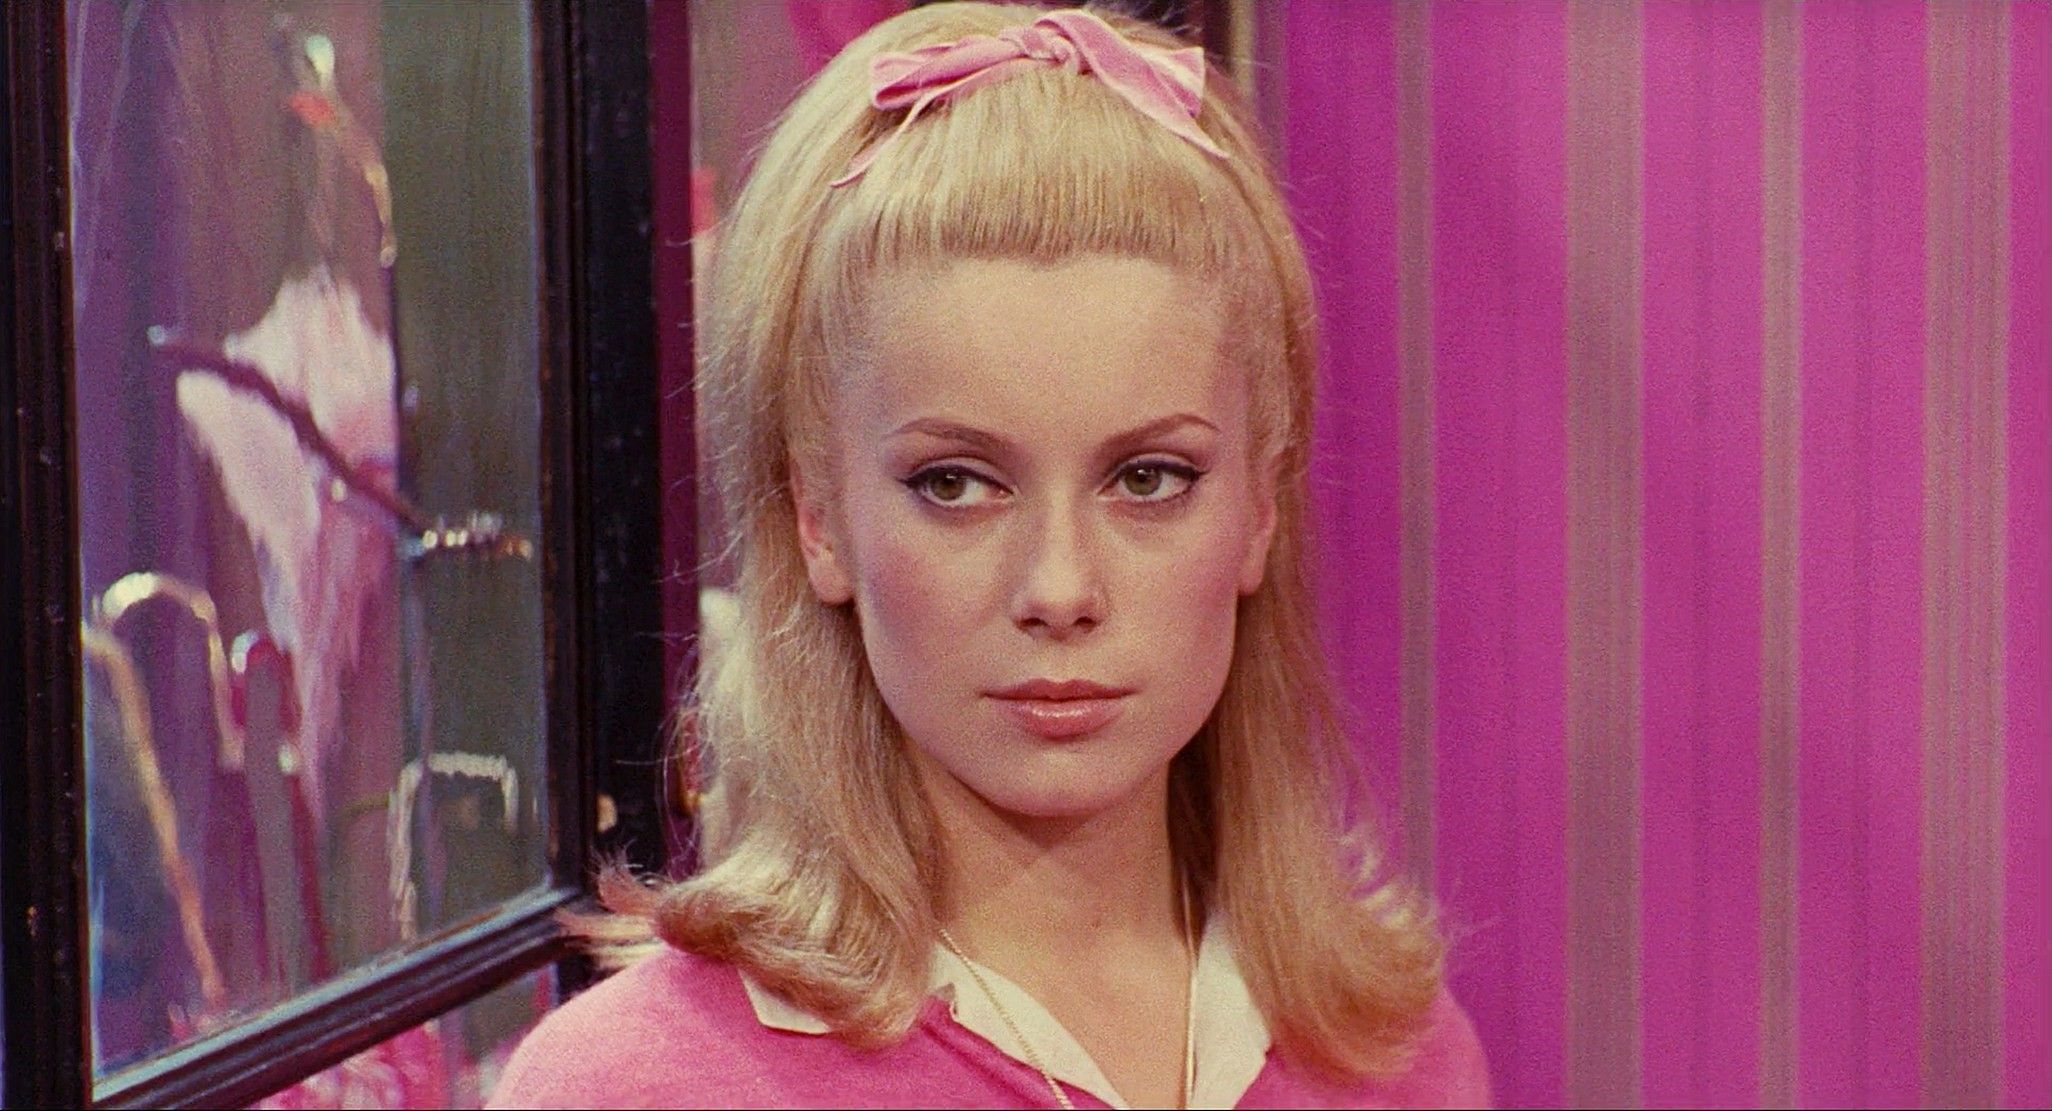 The Technicolour 1960s Musical That Launched Catherine Deneuve's Career